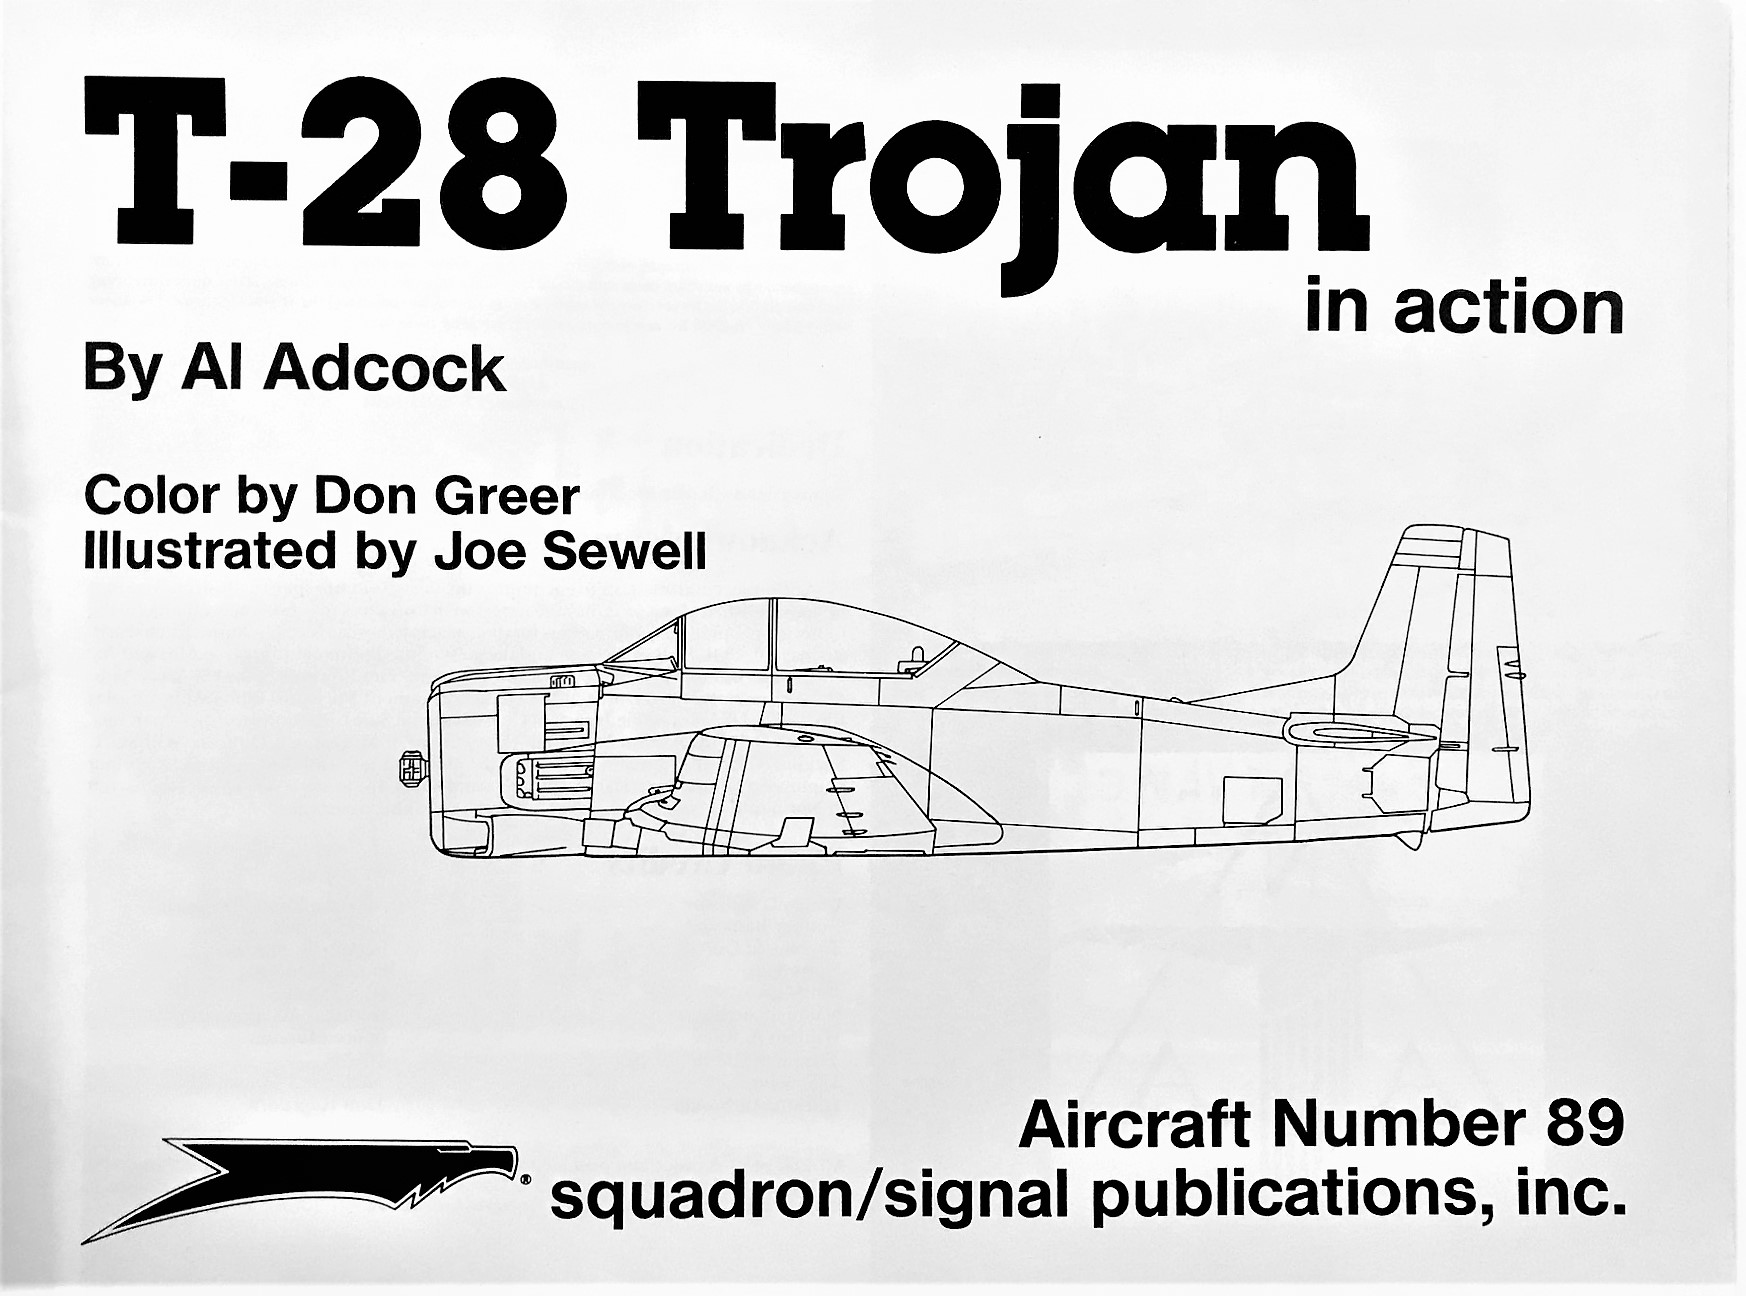 T-28 TROJAN IN ACTION SQUADRON/SIGNAL PUBLICATIONS AIRCRAFT NUMBER N°89 